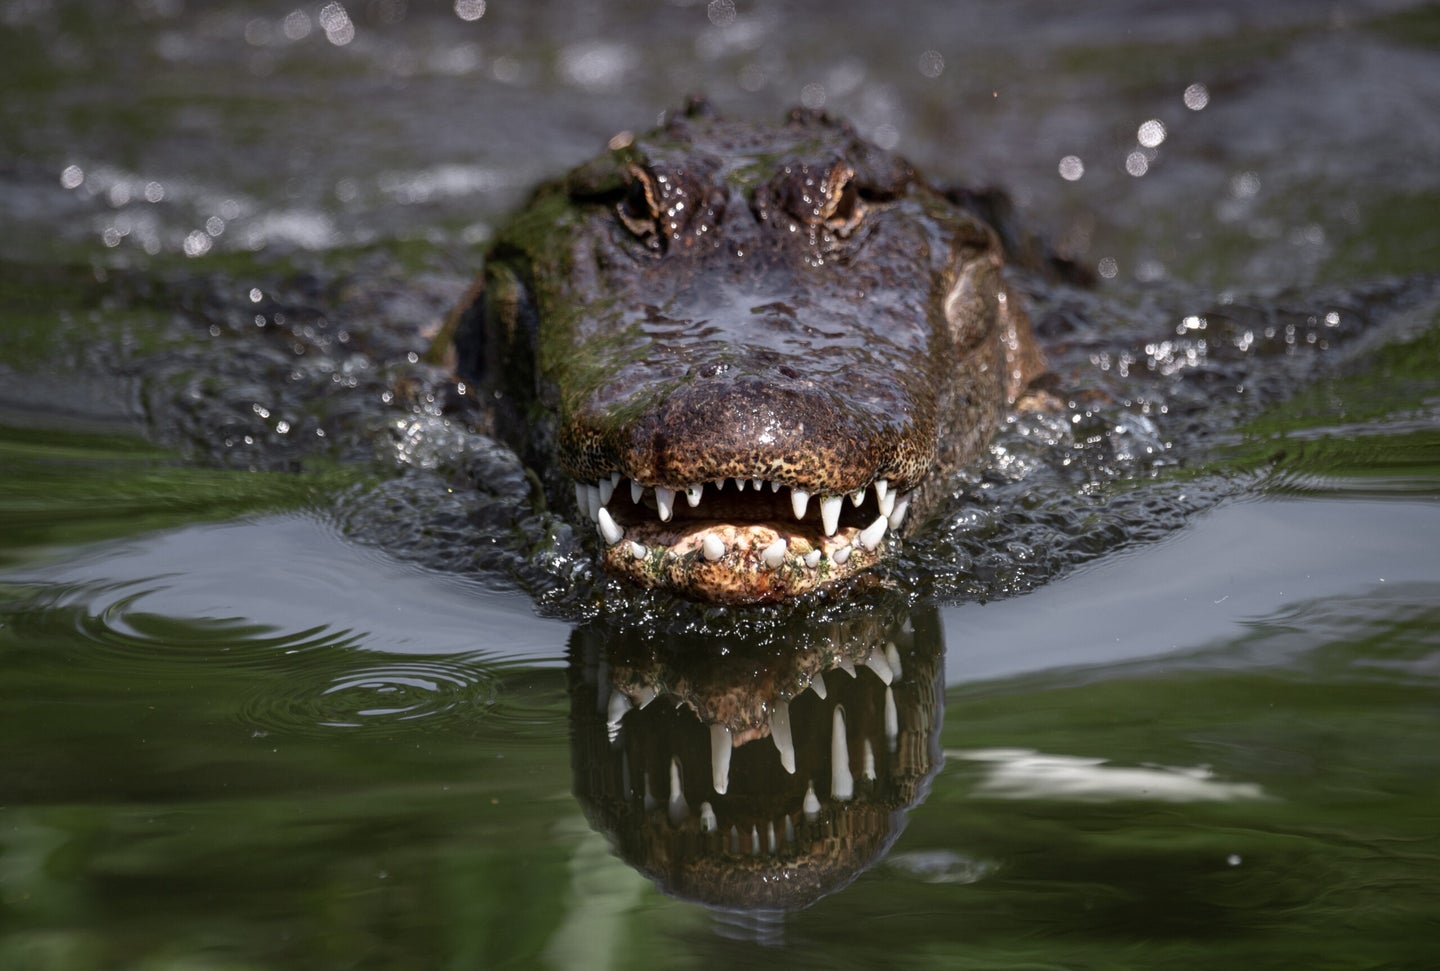 An alligator with its teeth showing swims in a lake with its head out of the water.